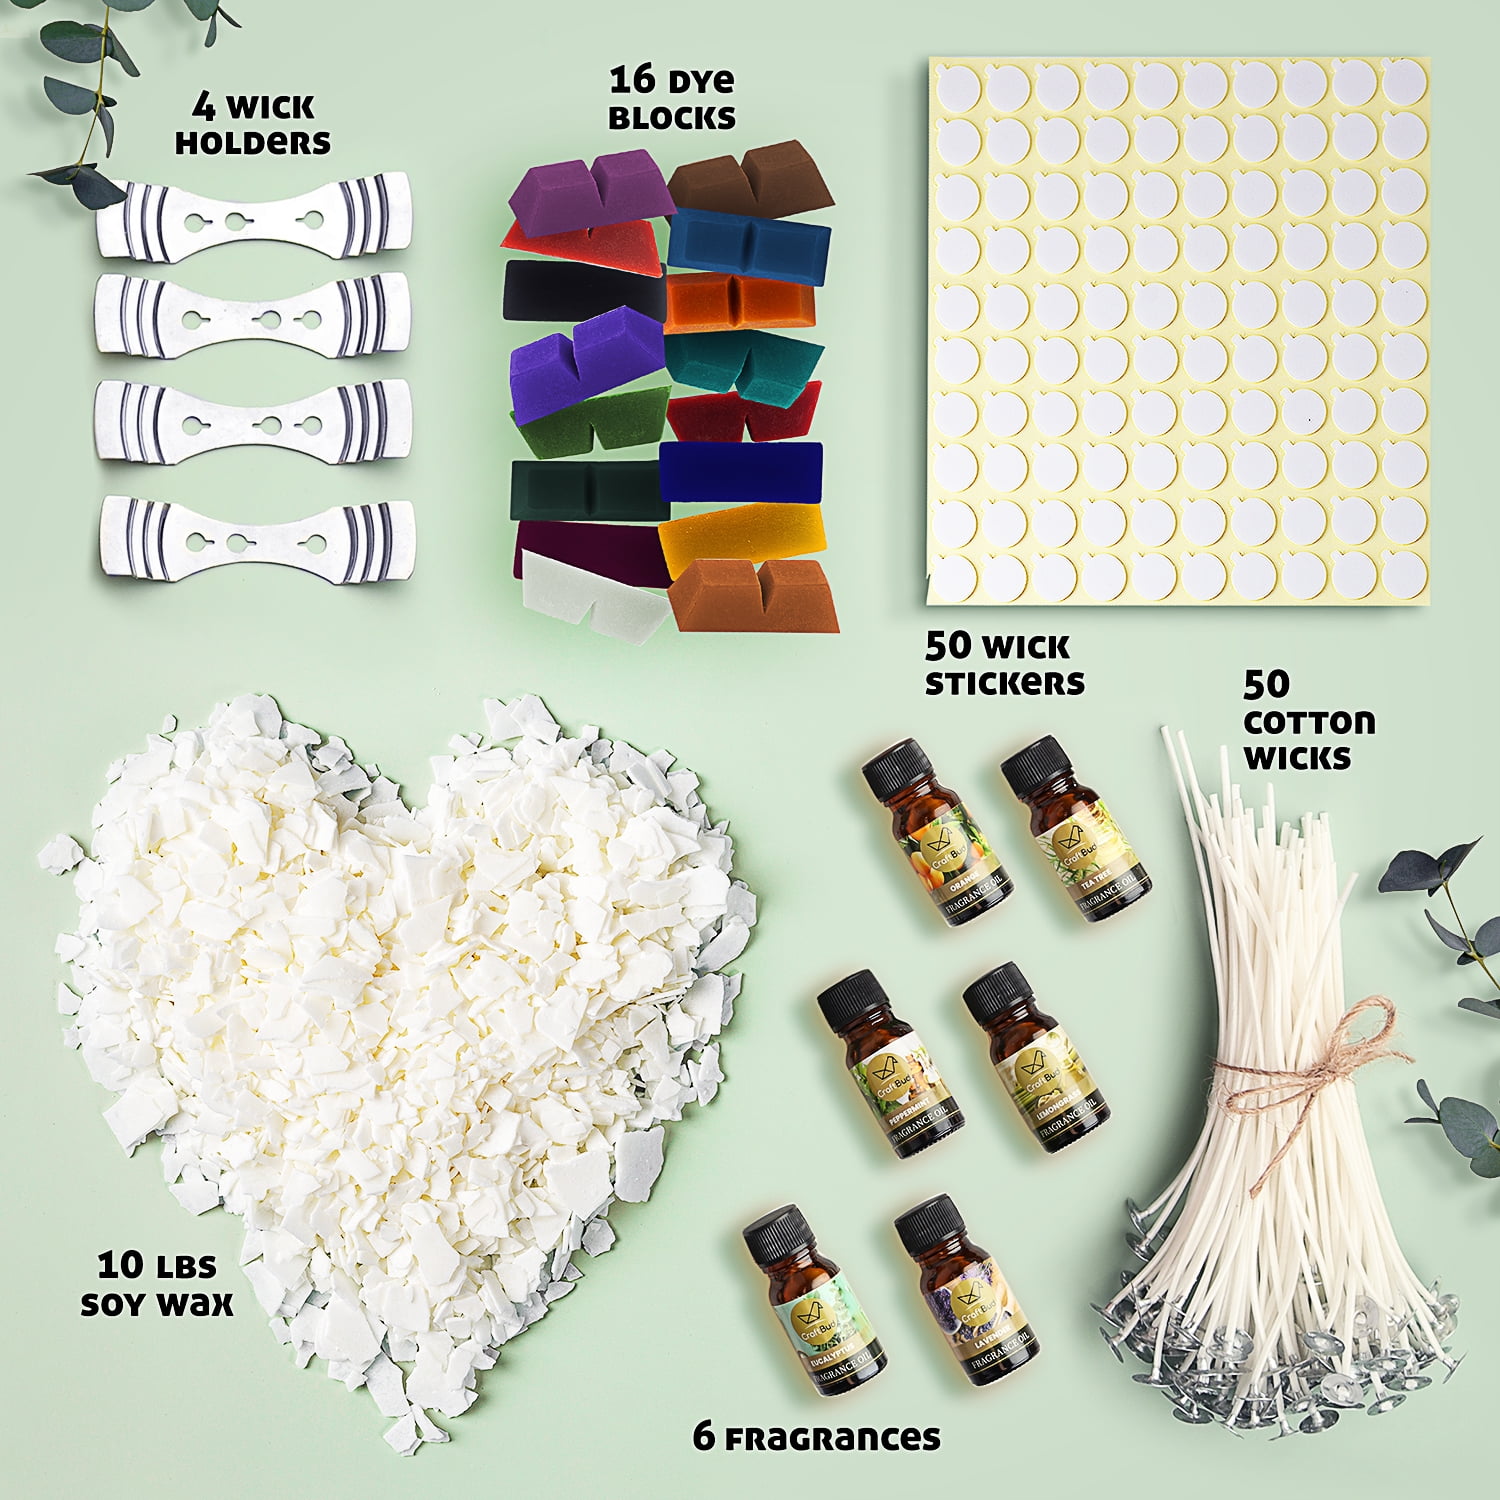 Craftbud DIY Candle Making Supplies - Kit for Adults and Beginners - White